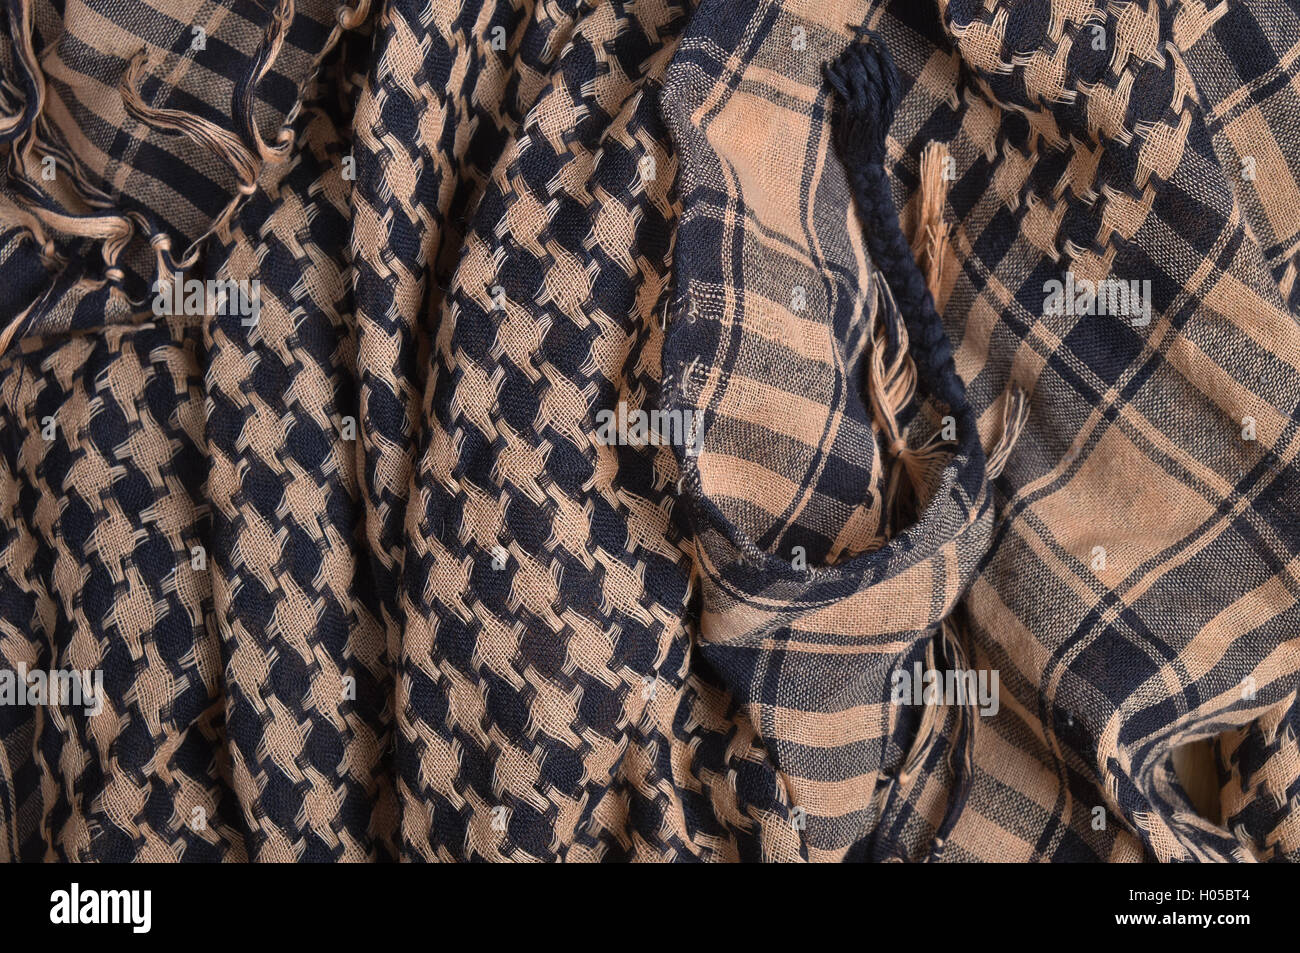 Shemagh (Keffiyeh) scarf. Traditional and tactical garments Stock Photo